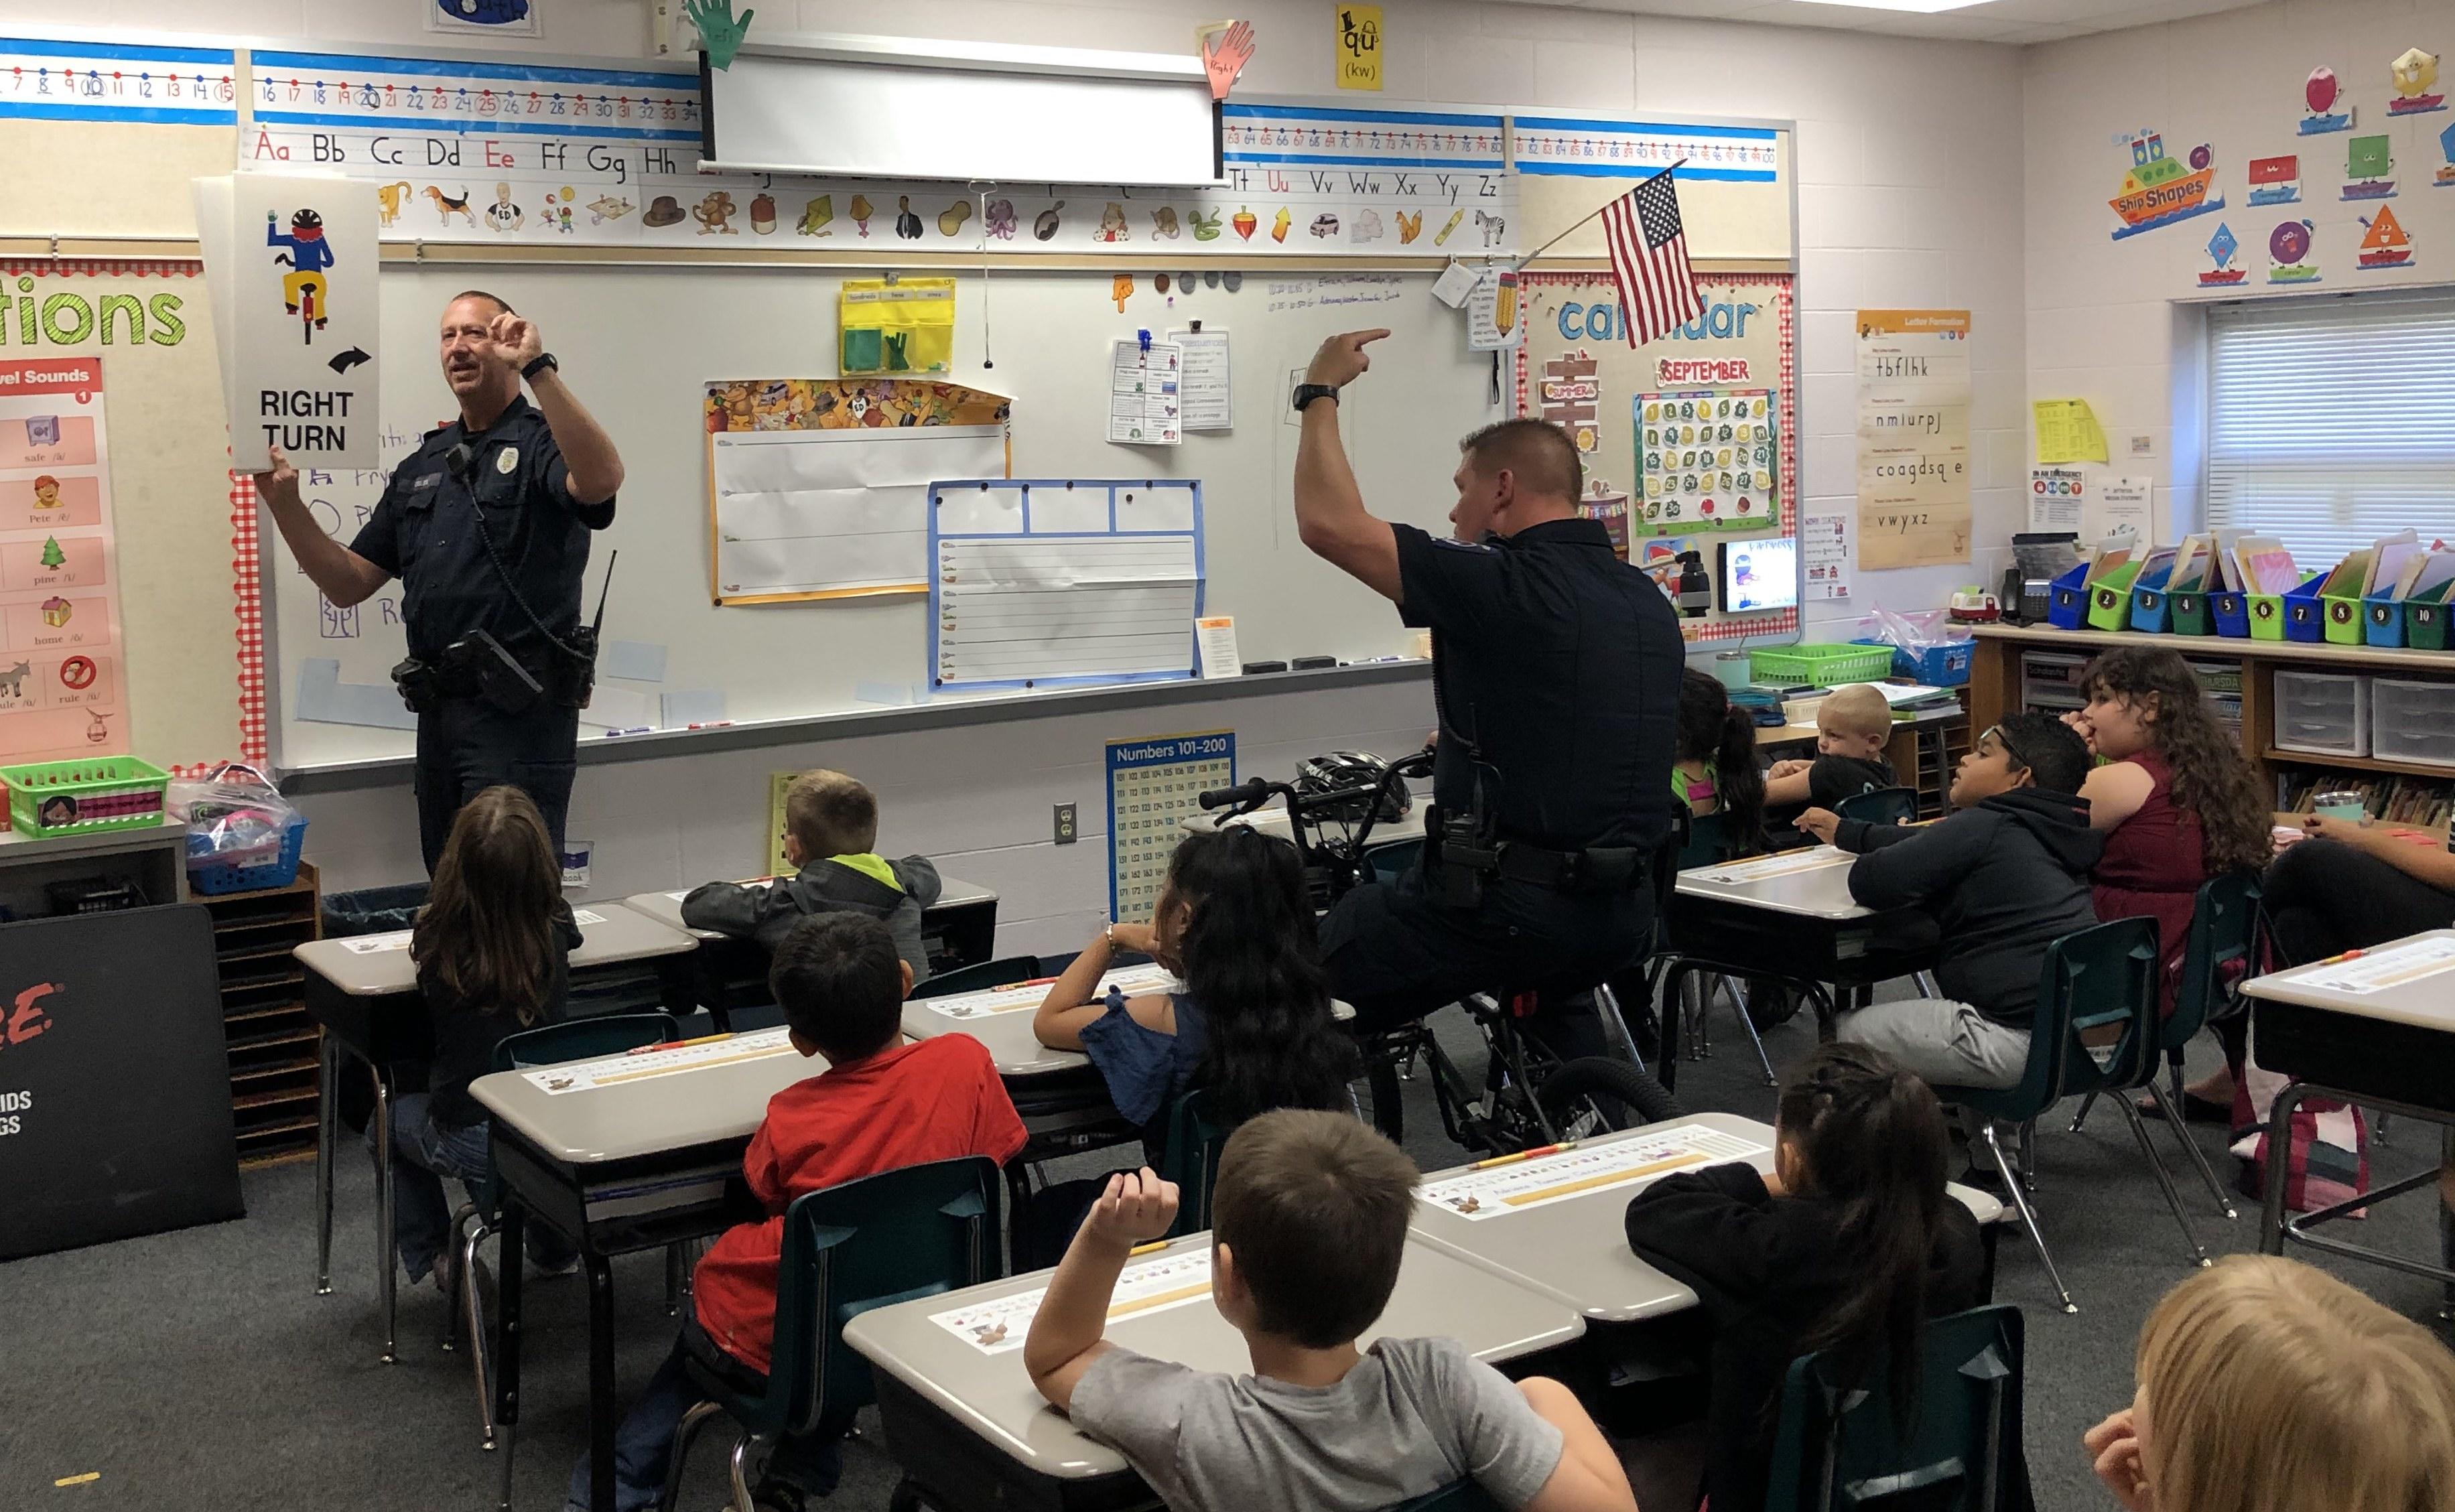 Officer DeLee and Officer Owen with Jefferson class